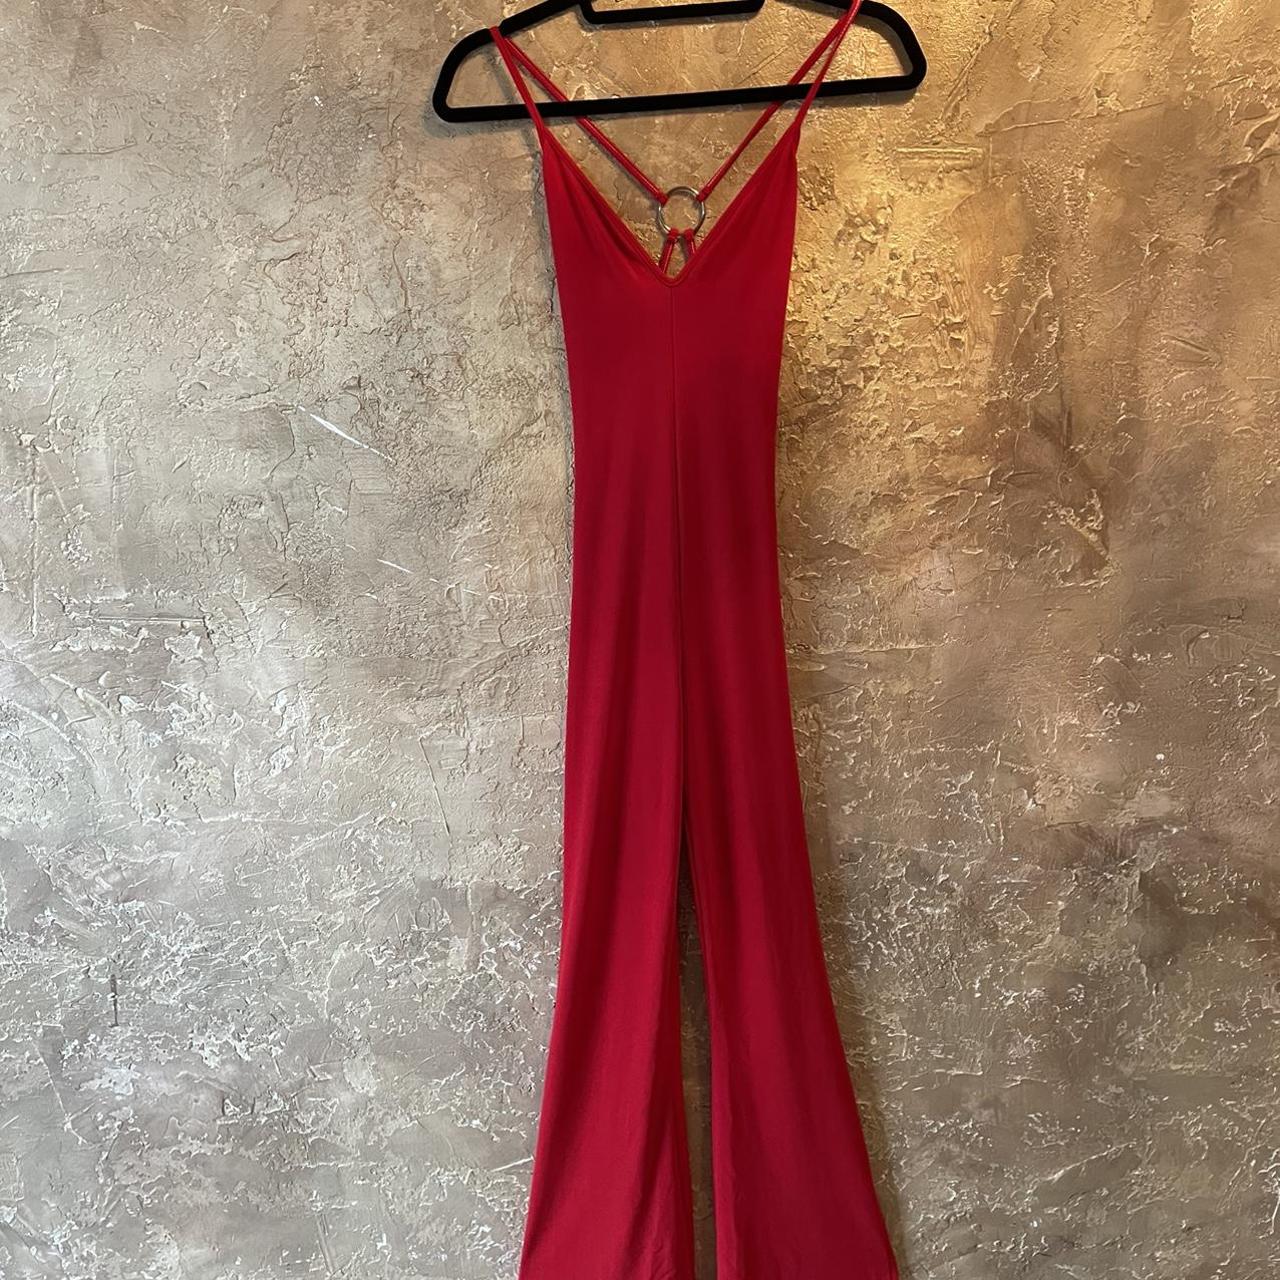 RED JUMPSUIT WITH SLITS